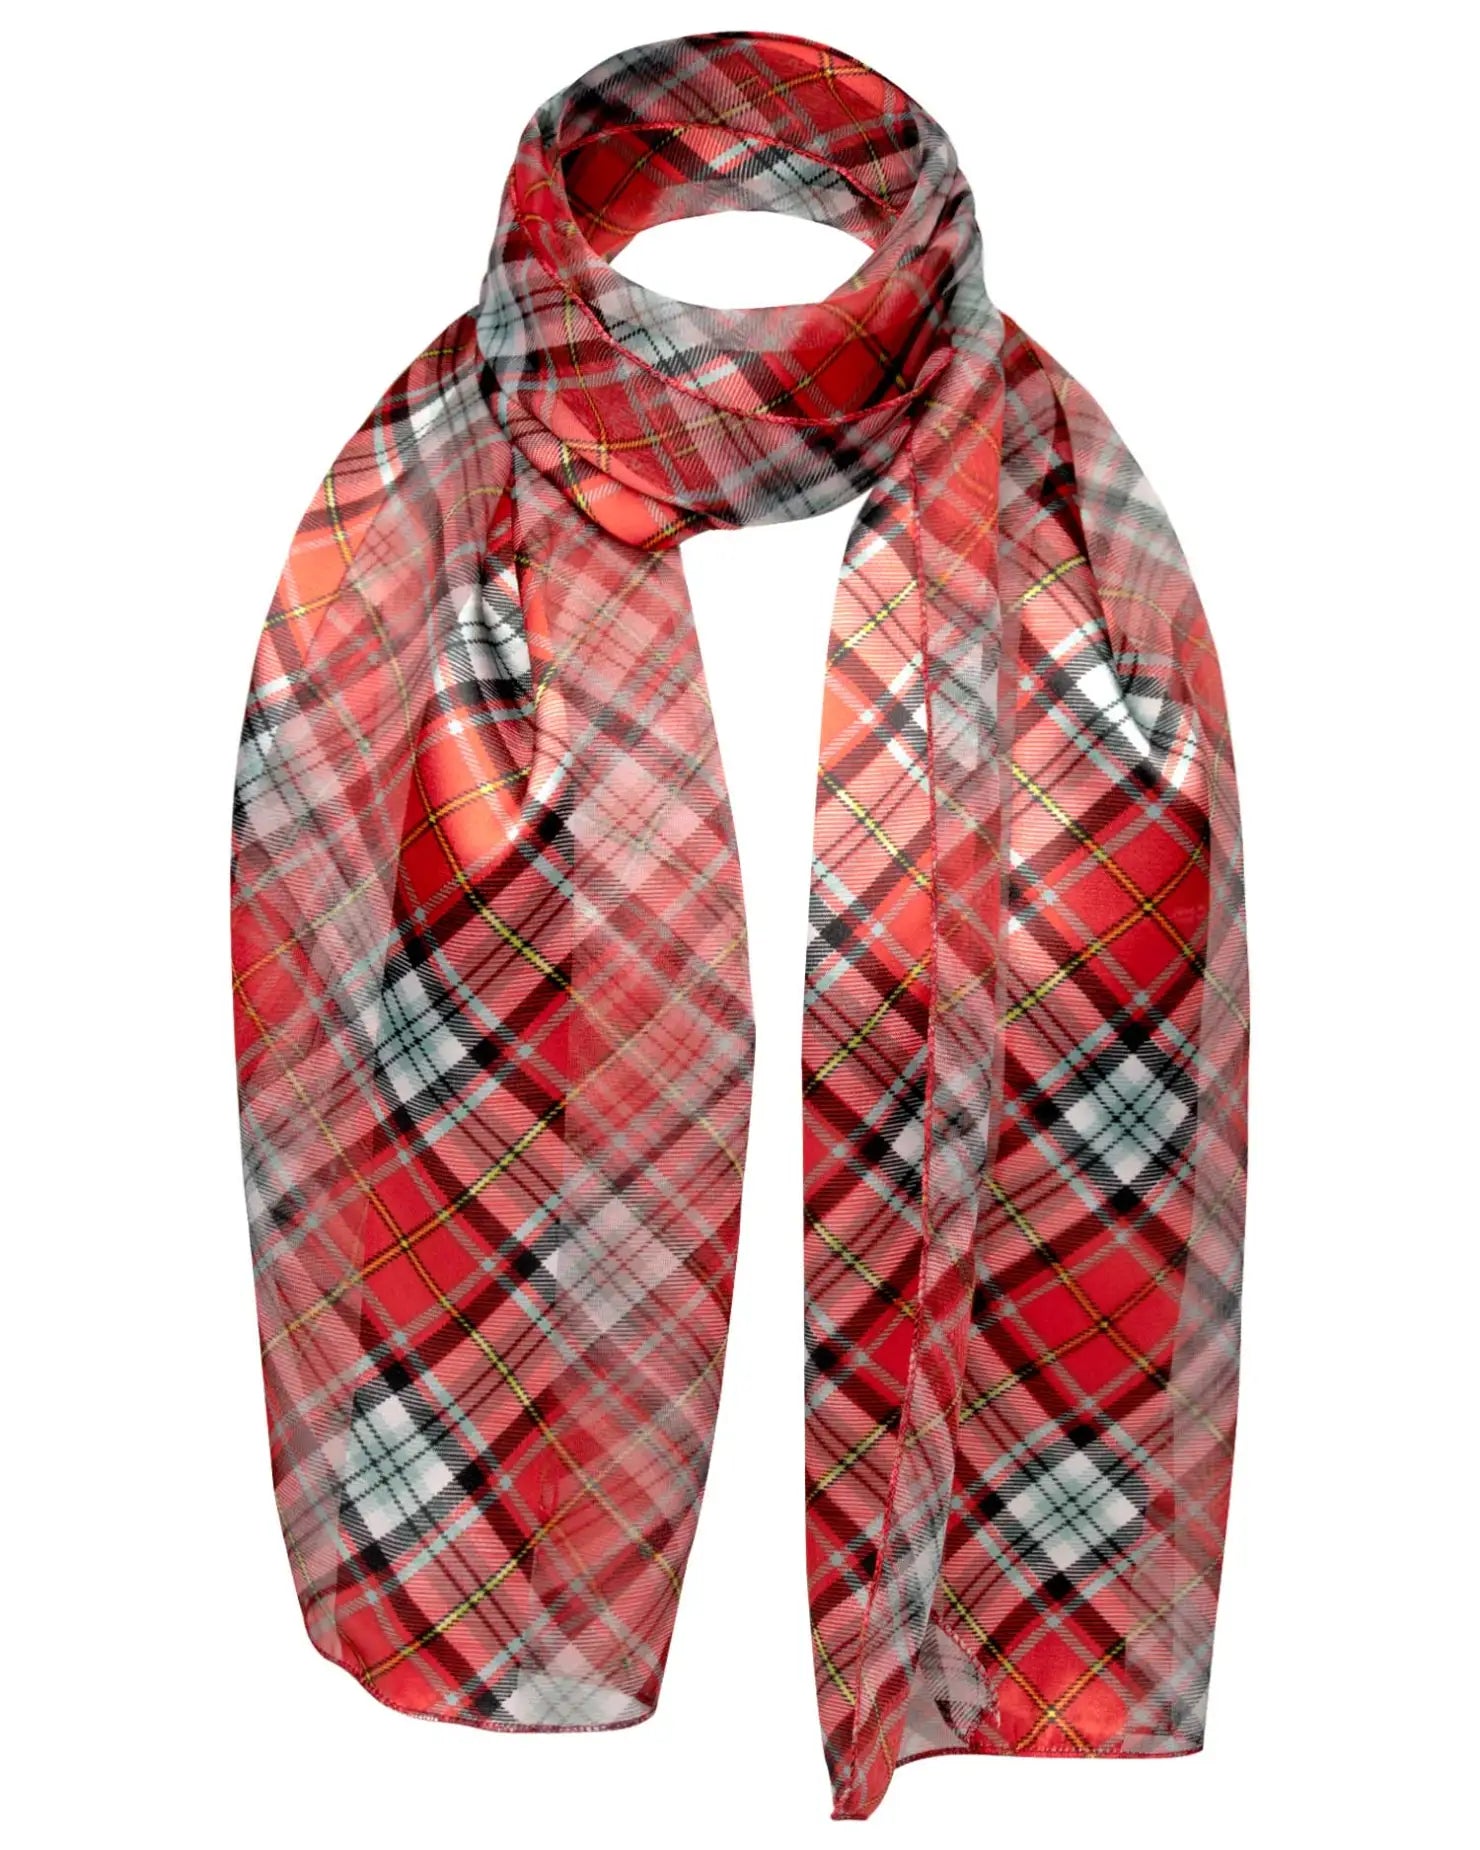 Unisex Scottish Check Wrap Scarf with Satin Stripe - Soft, Silky, Versatile in Red Plaid